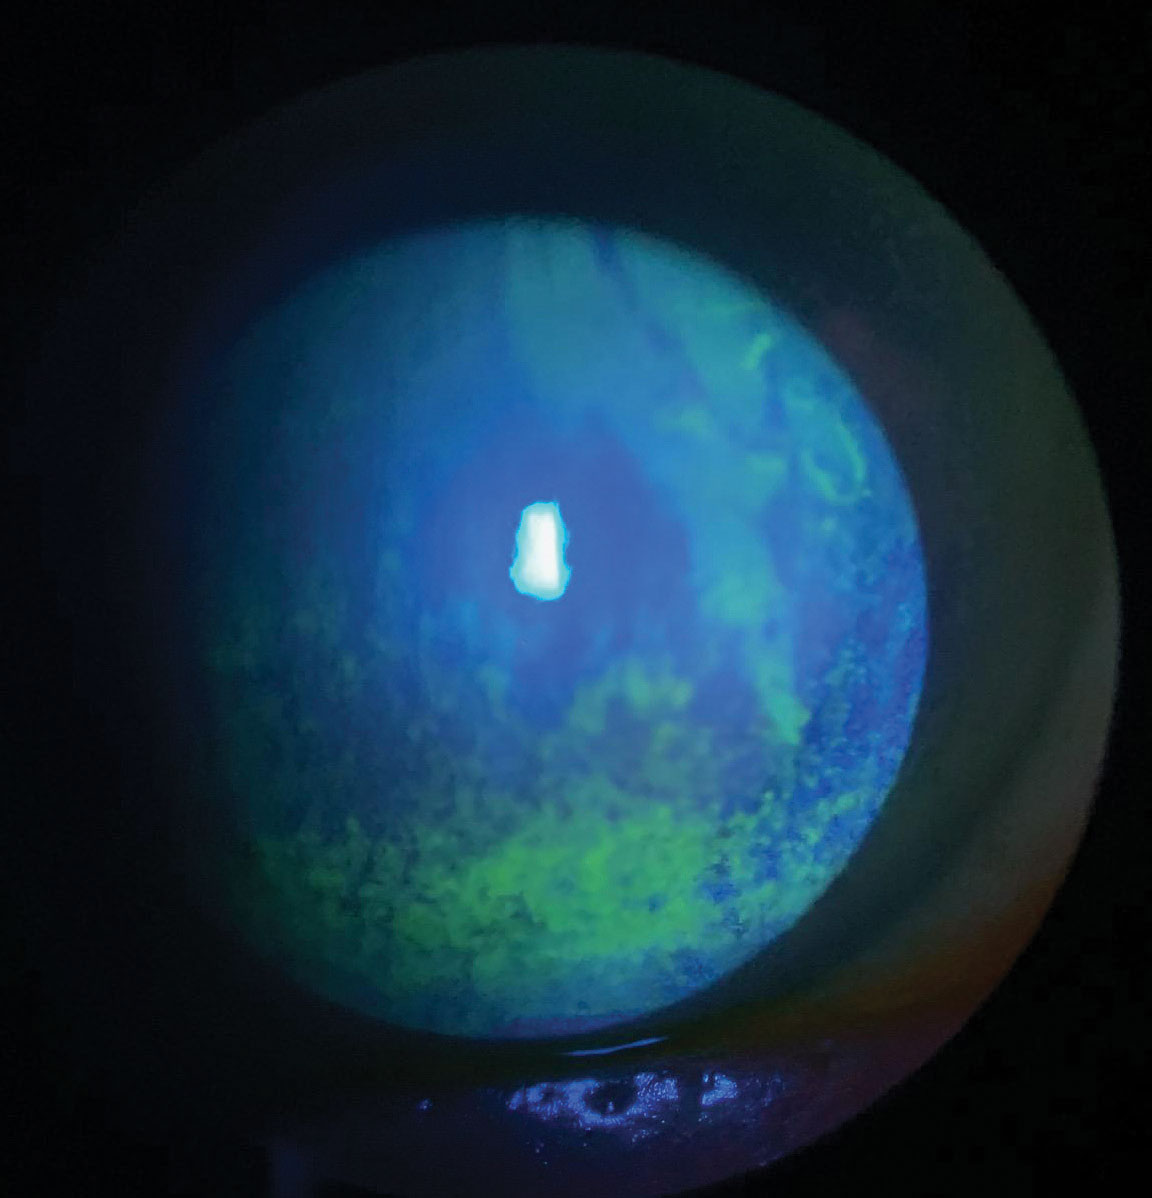 According to the study, 48.9% patients presented with a discrepancy in subjective symptoms and corneal findings. Among these cases, subjects were three times more likely to have positive symptoms in the absence of corneal epithelial damage than vice-versa.